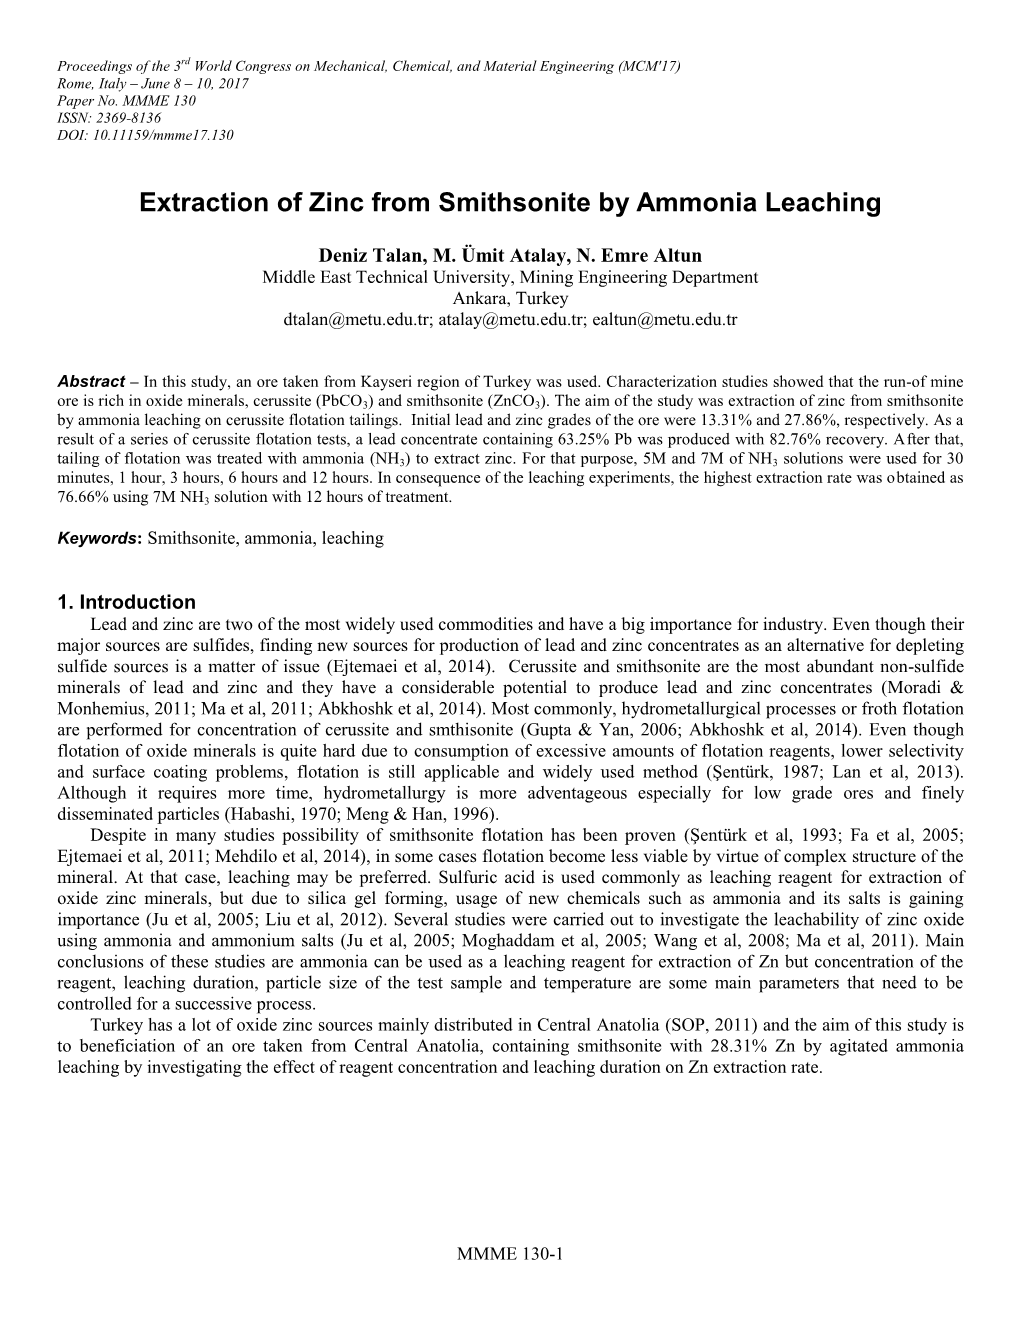 Extraction of Zinc from Smithsonite by Ammonia Leaching